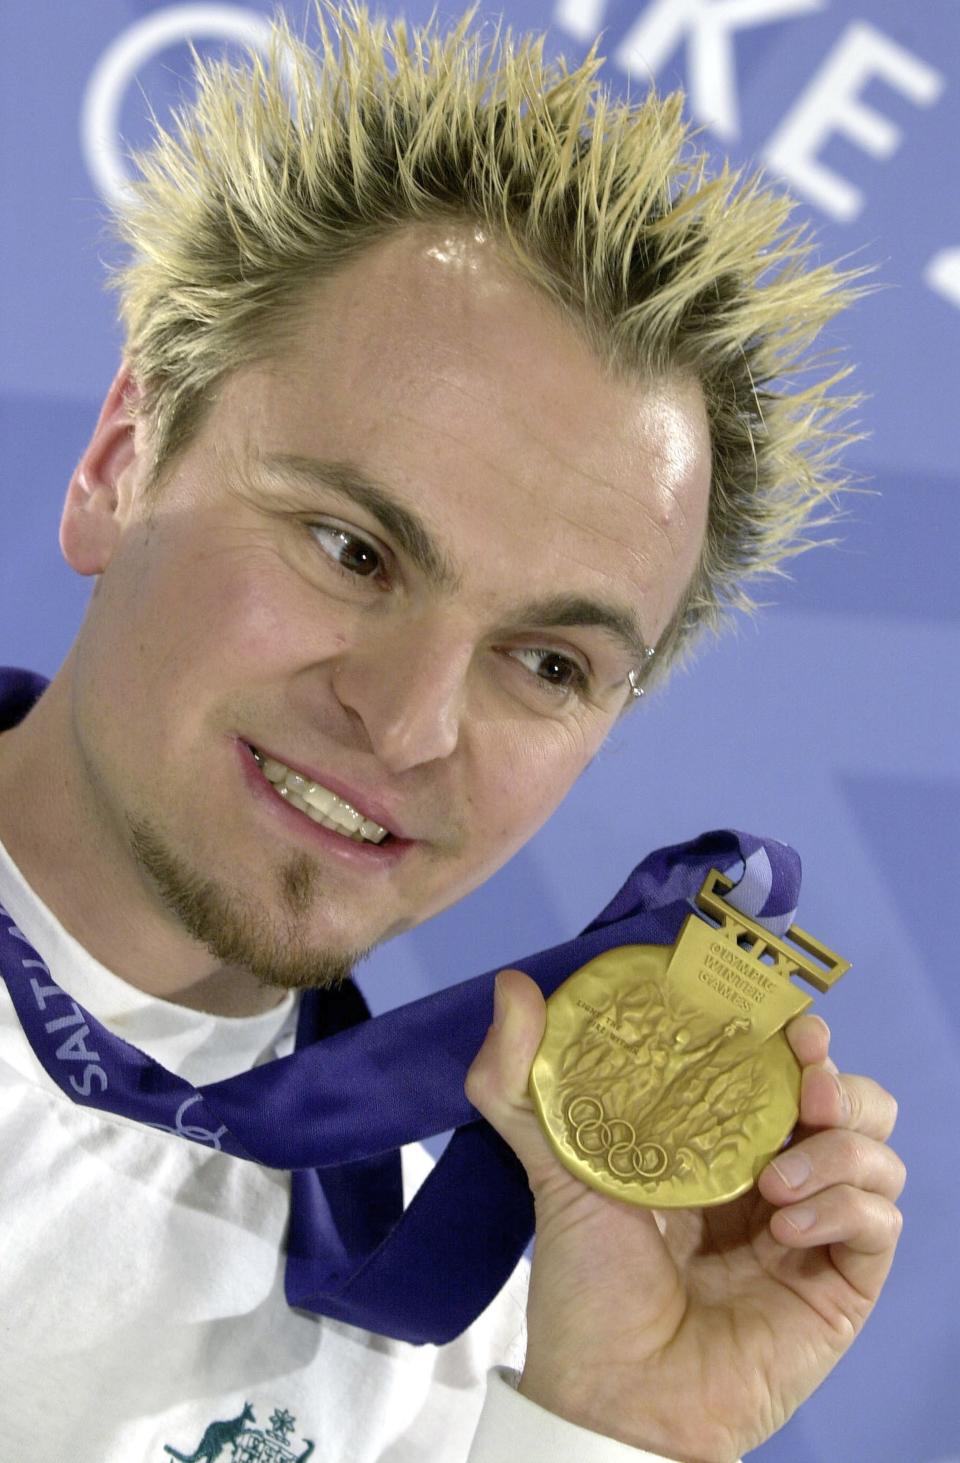 FILE - Steven Bradbury Australia's surprise gold medalist in 1000 metres short track speed skating event displays his medal at a press conference in Salt Lake City, Sunday, Feb. 17, 2002. Bradbury has been presented with a bravery award by the Queensland state governor in Brisbane for rescuing four teenagers from rough seas at a beach at Caloundra north of Brisbane in March of last year. (AP Photo/Peter Dejong, File)